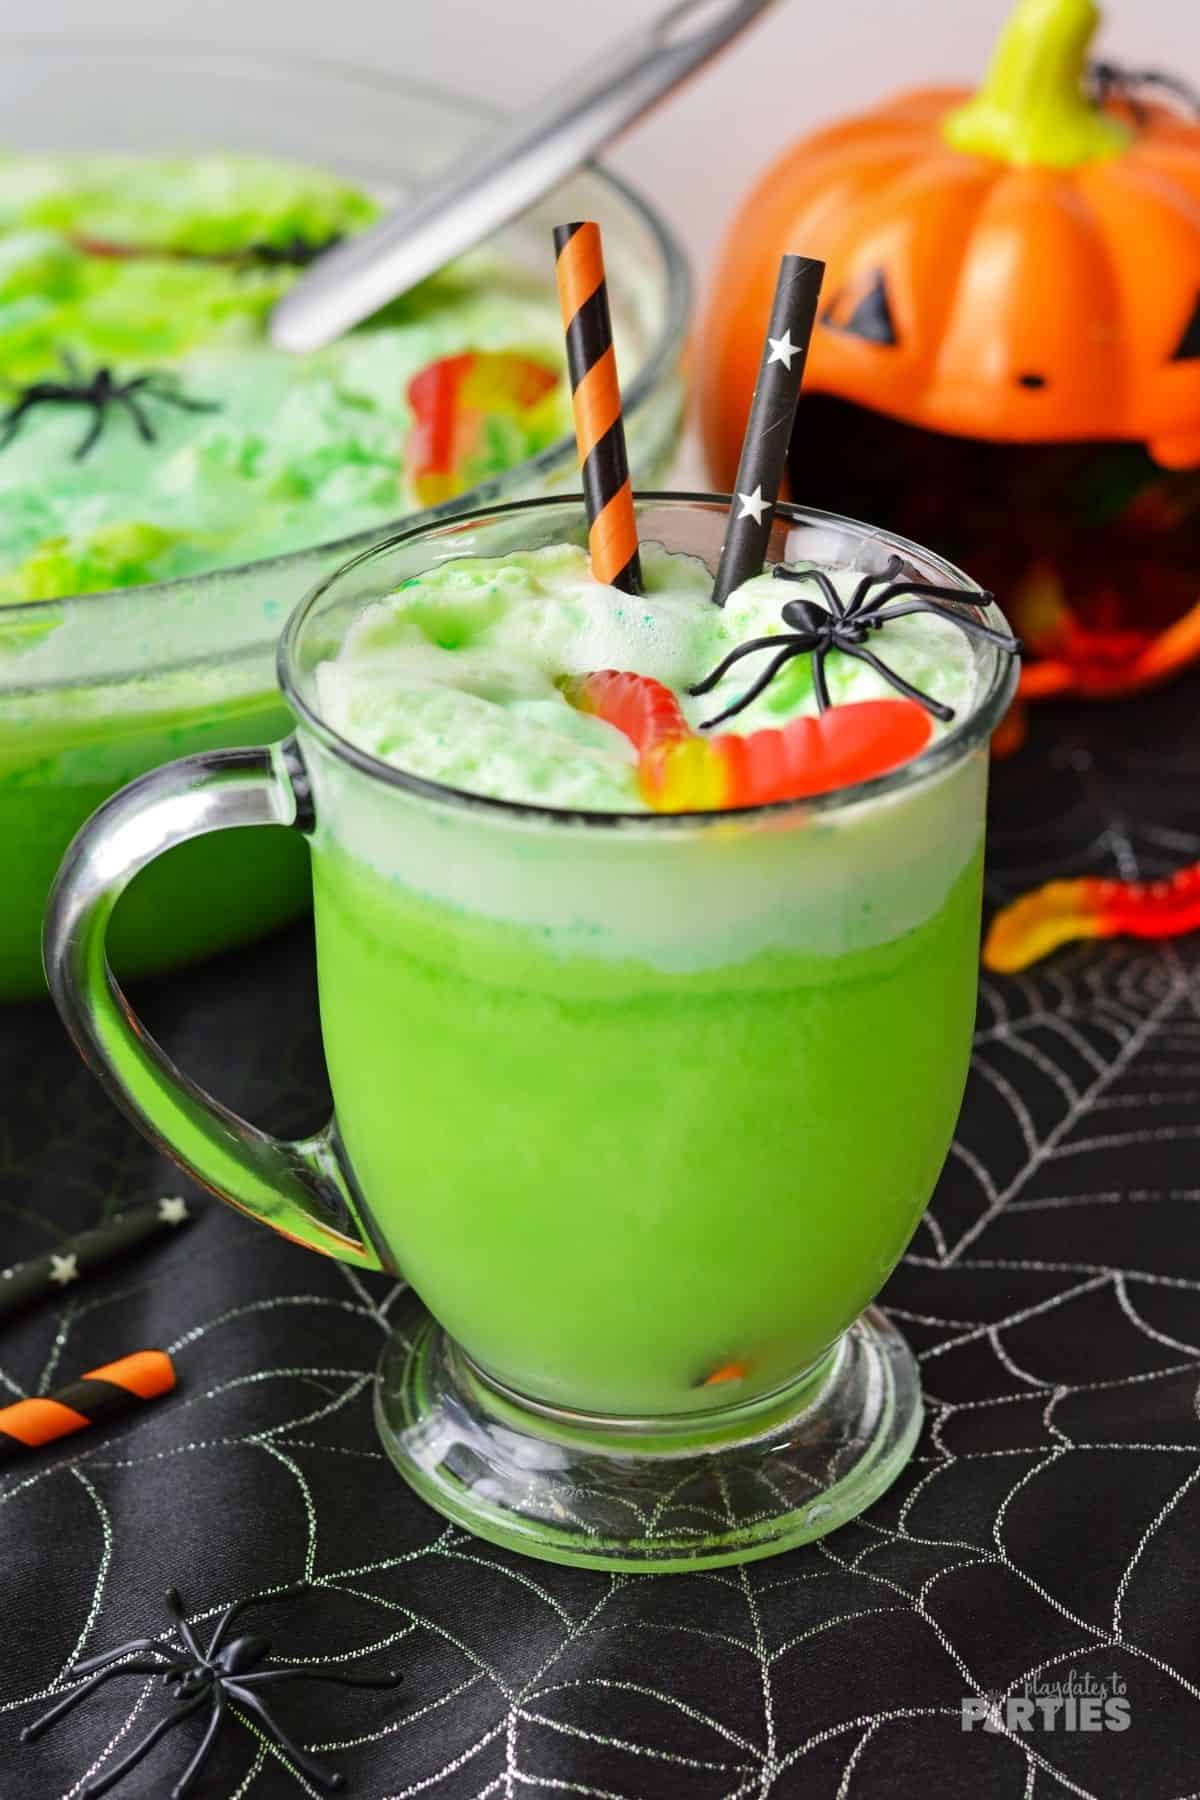 A glass mug filled with green witches brew Halloween party punch.